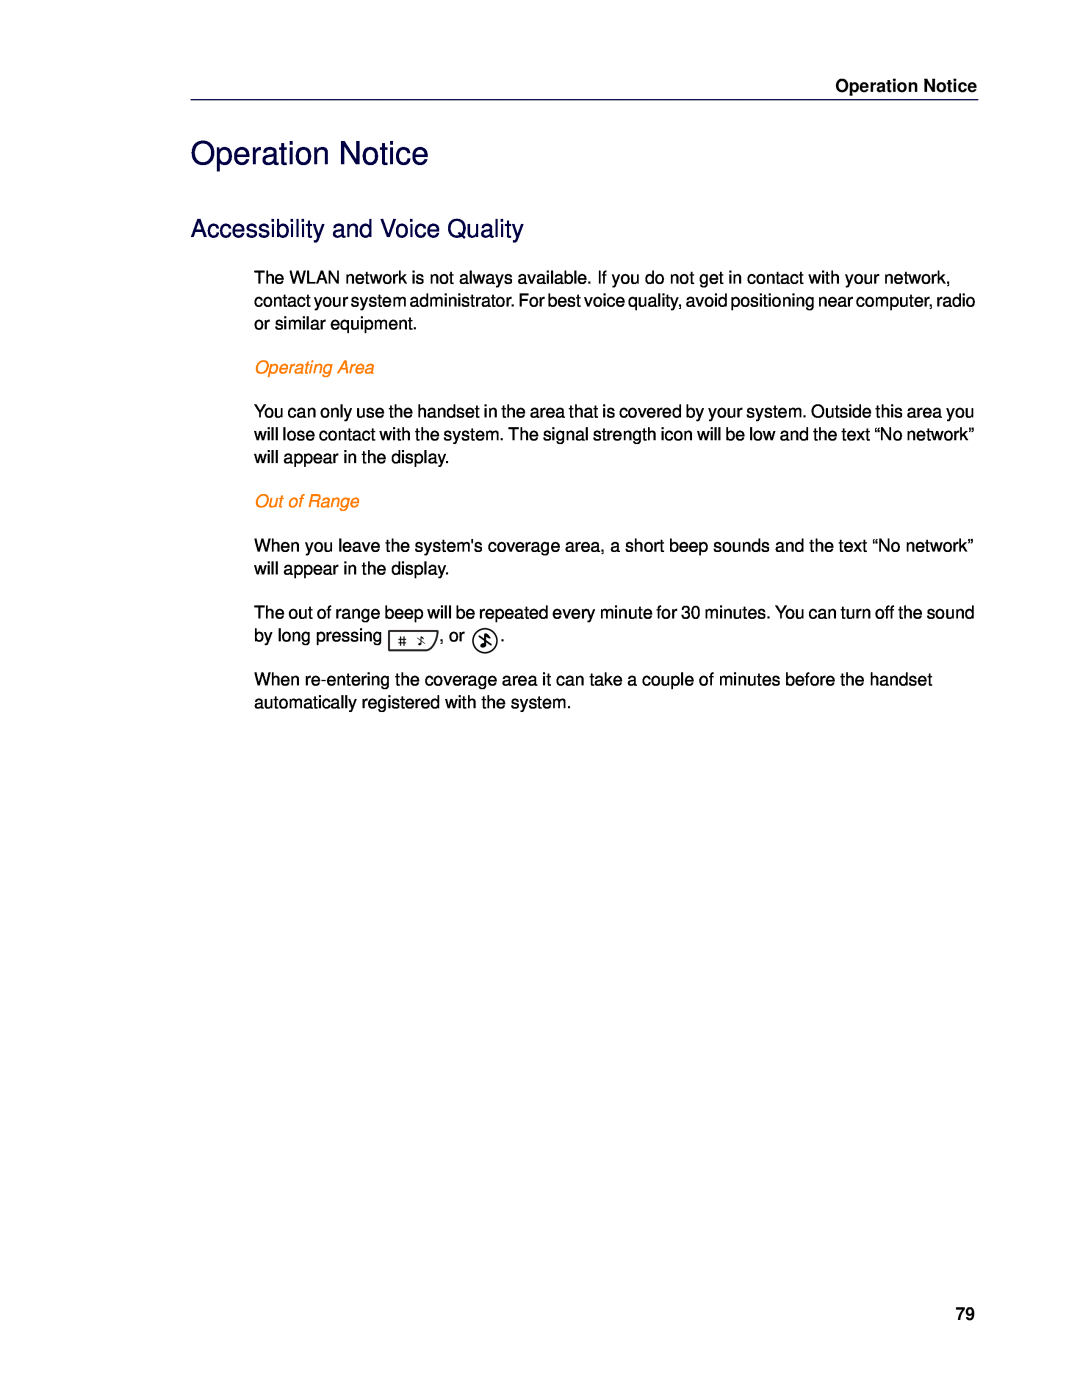 Mitel 5624 manual Operation Notice, Accessibility and Voice Quality, Operating Area, Out of Range 